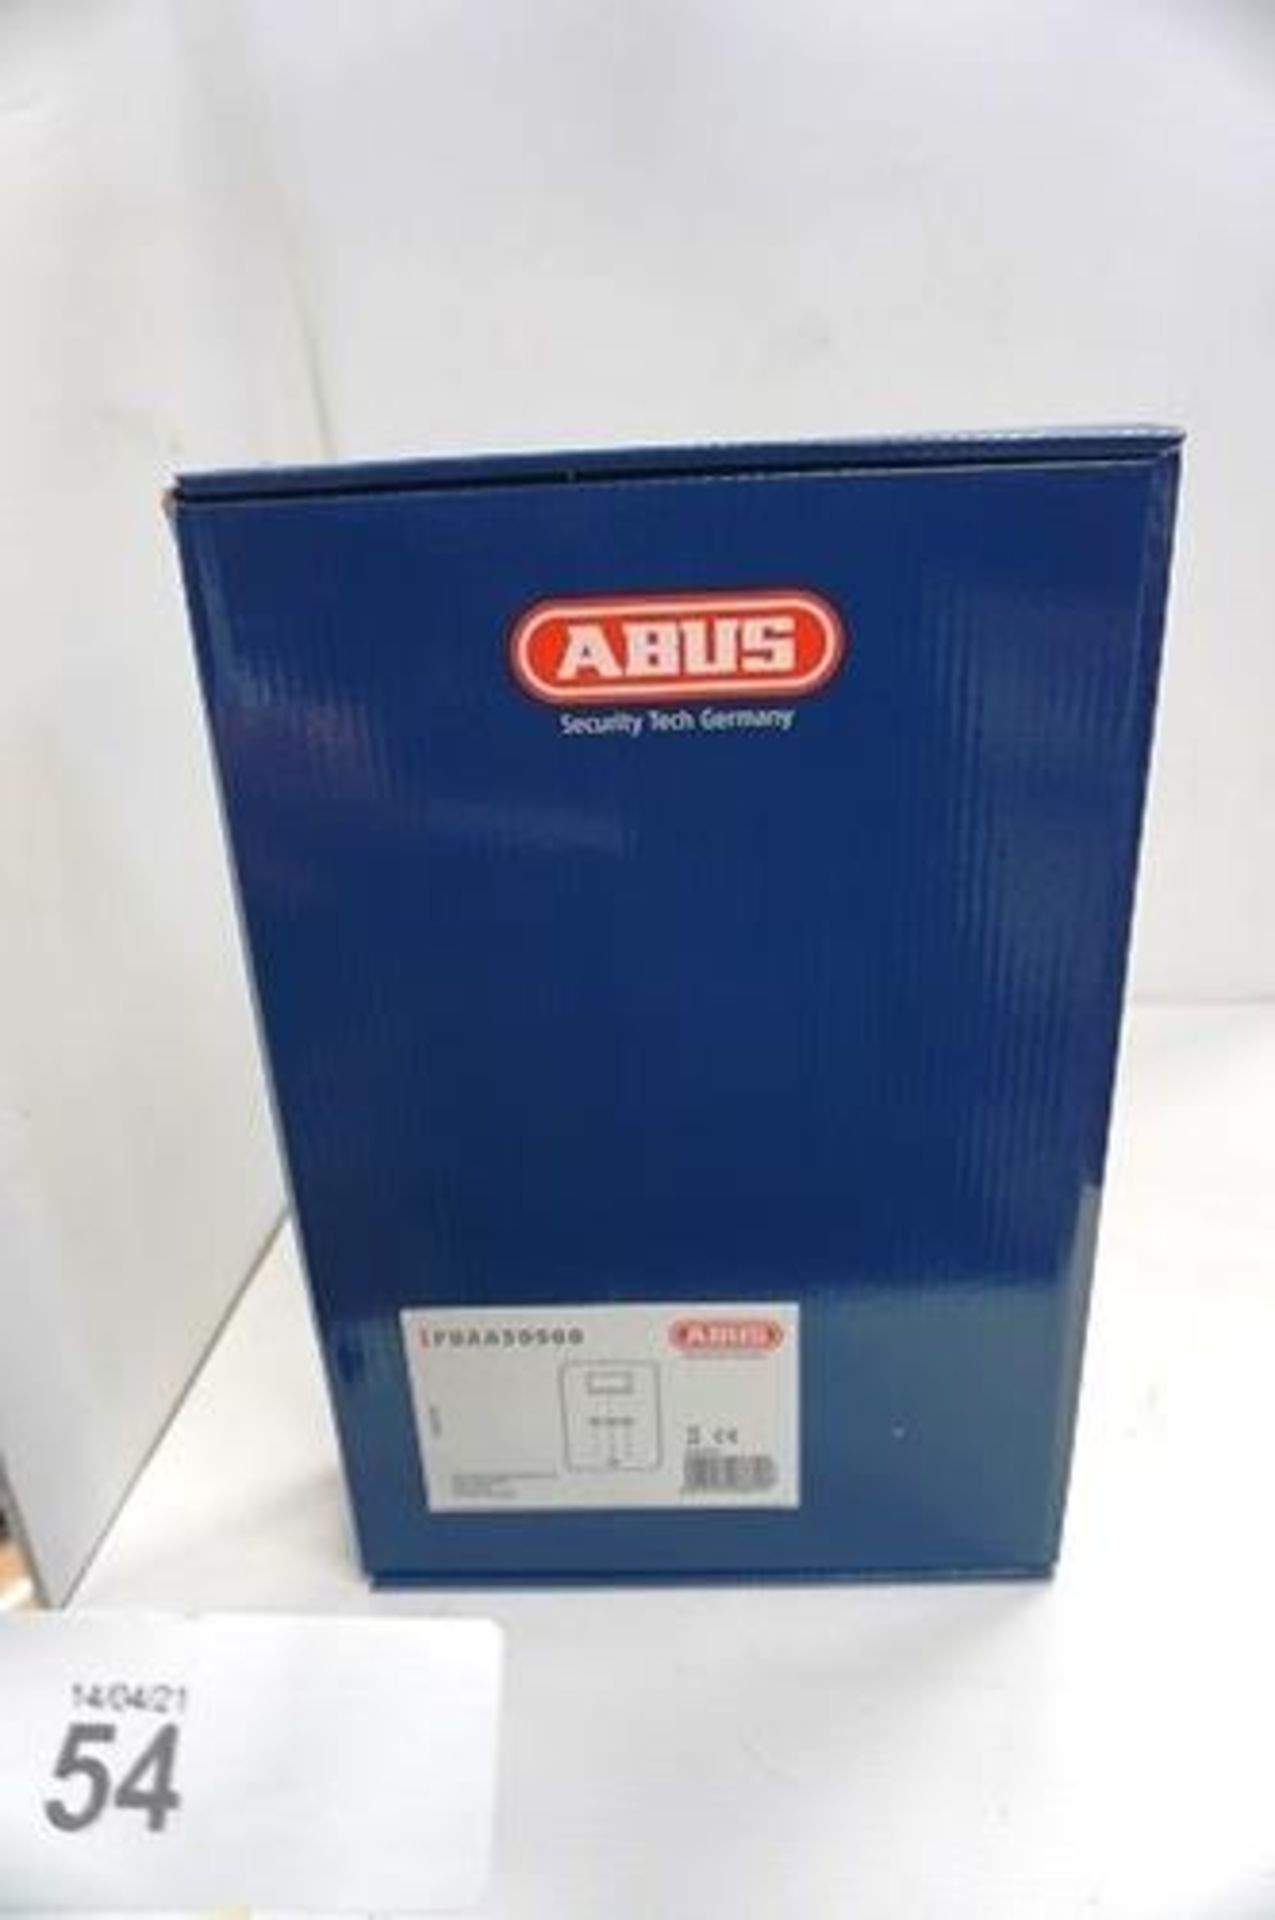 Abus Secvest touch wireless alarm system, model FUAA50500, control panel only - Sealed new in box (